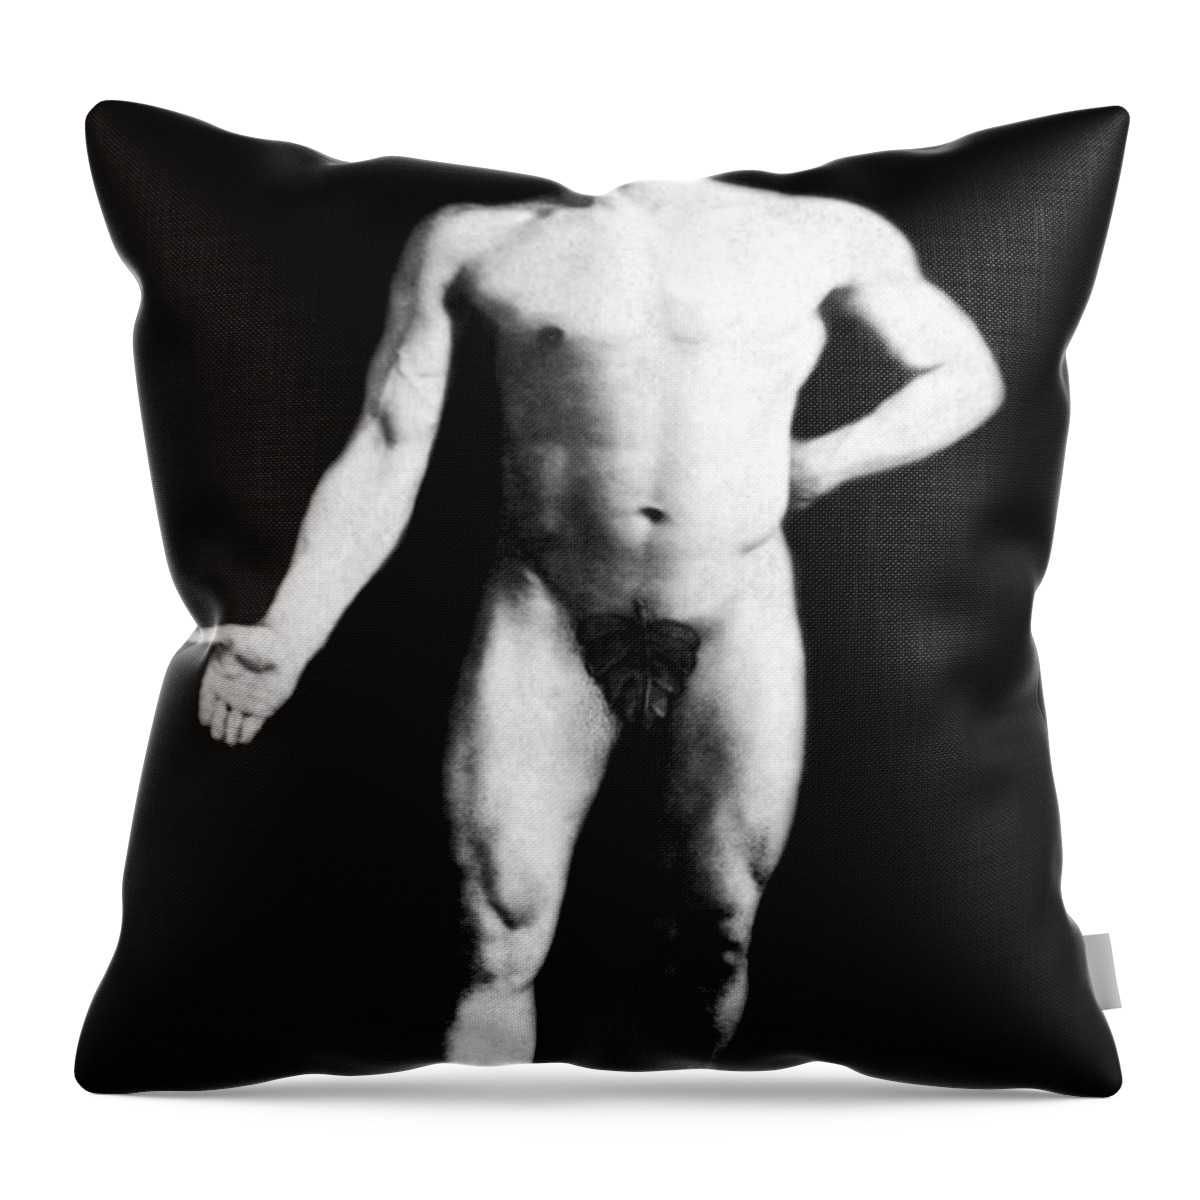 Body Throw Pillow featuring the painting Nude Bodybuilder by Unknown